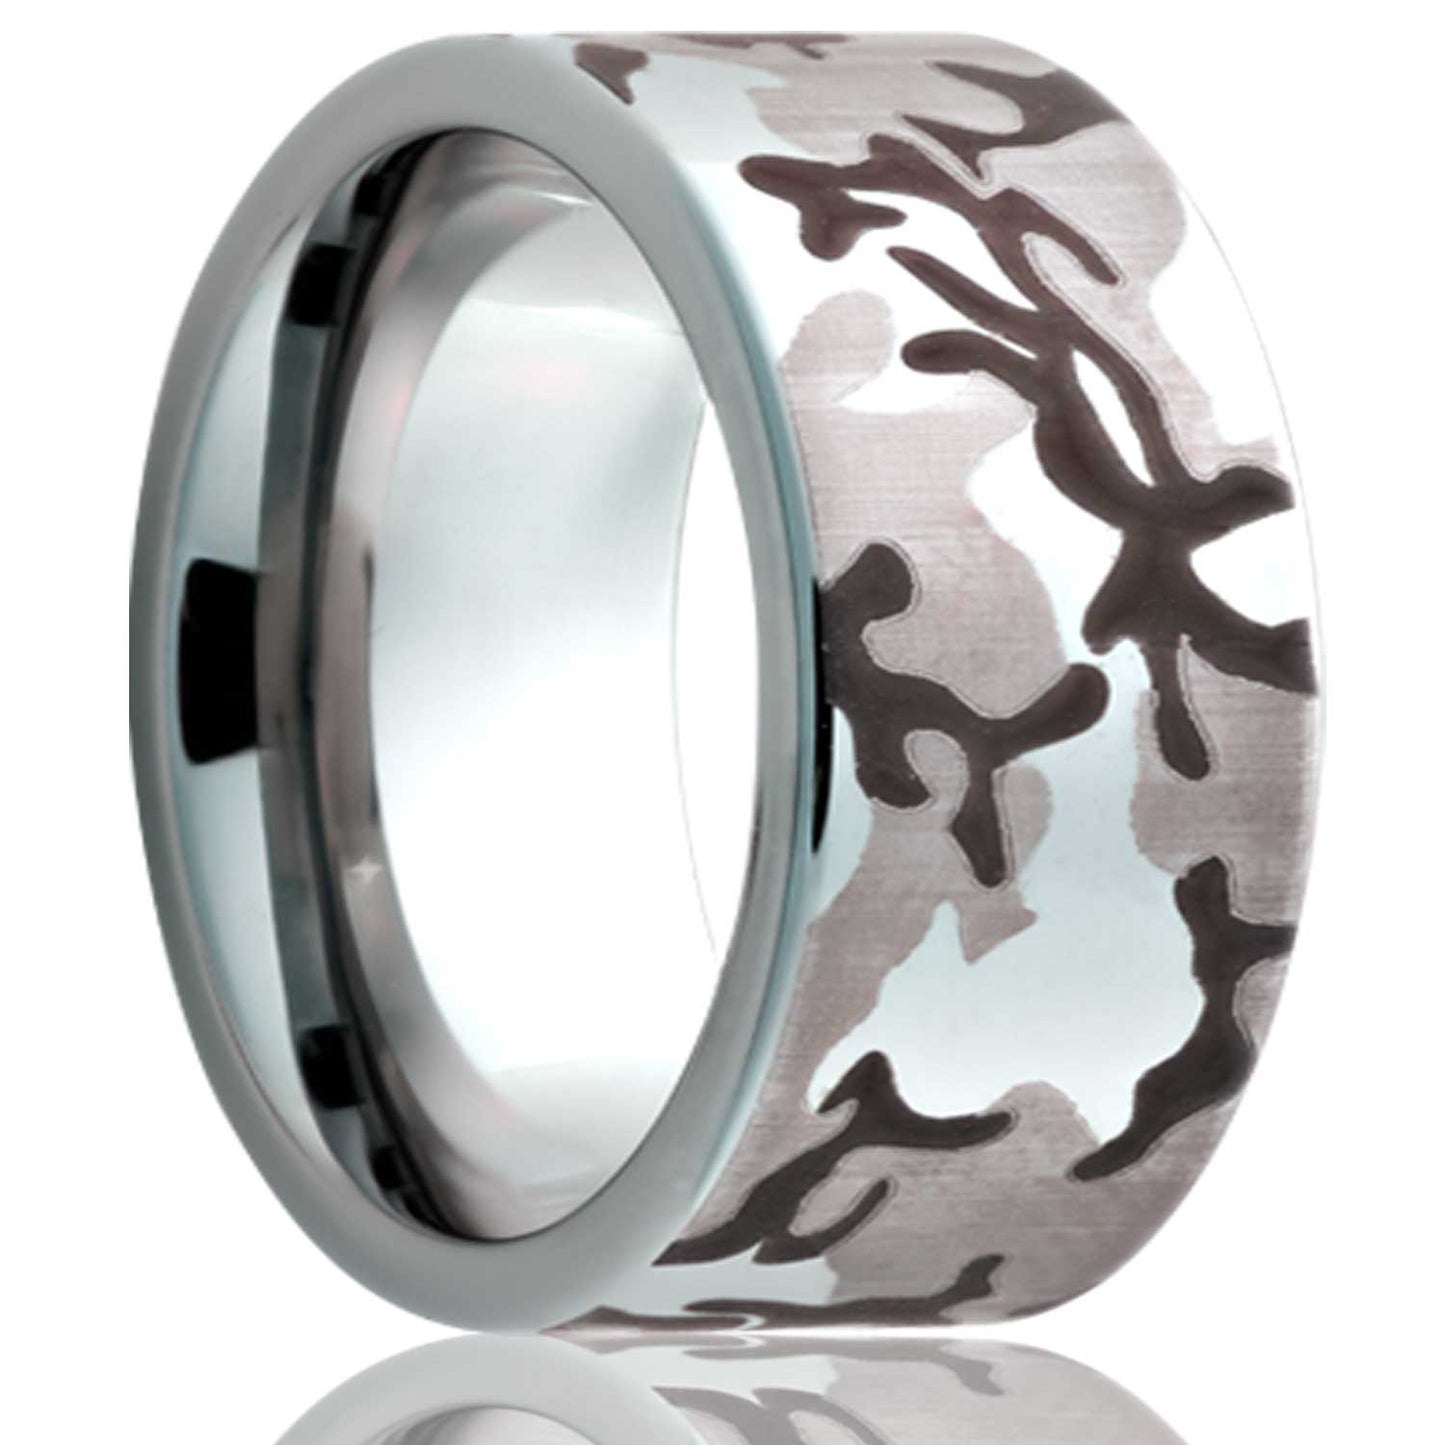 A engraved camo cobalt wedding band displayed on a neutral white background.